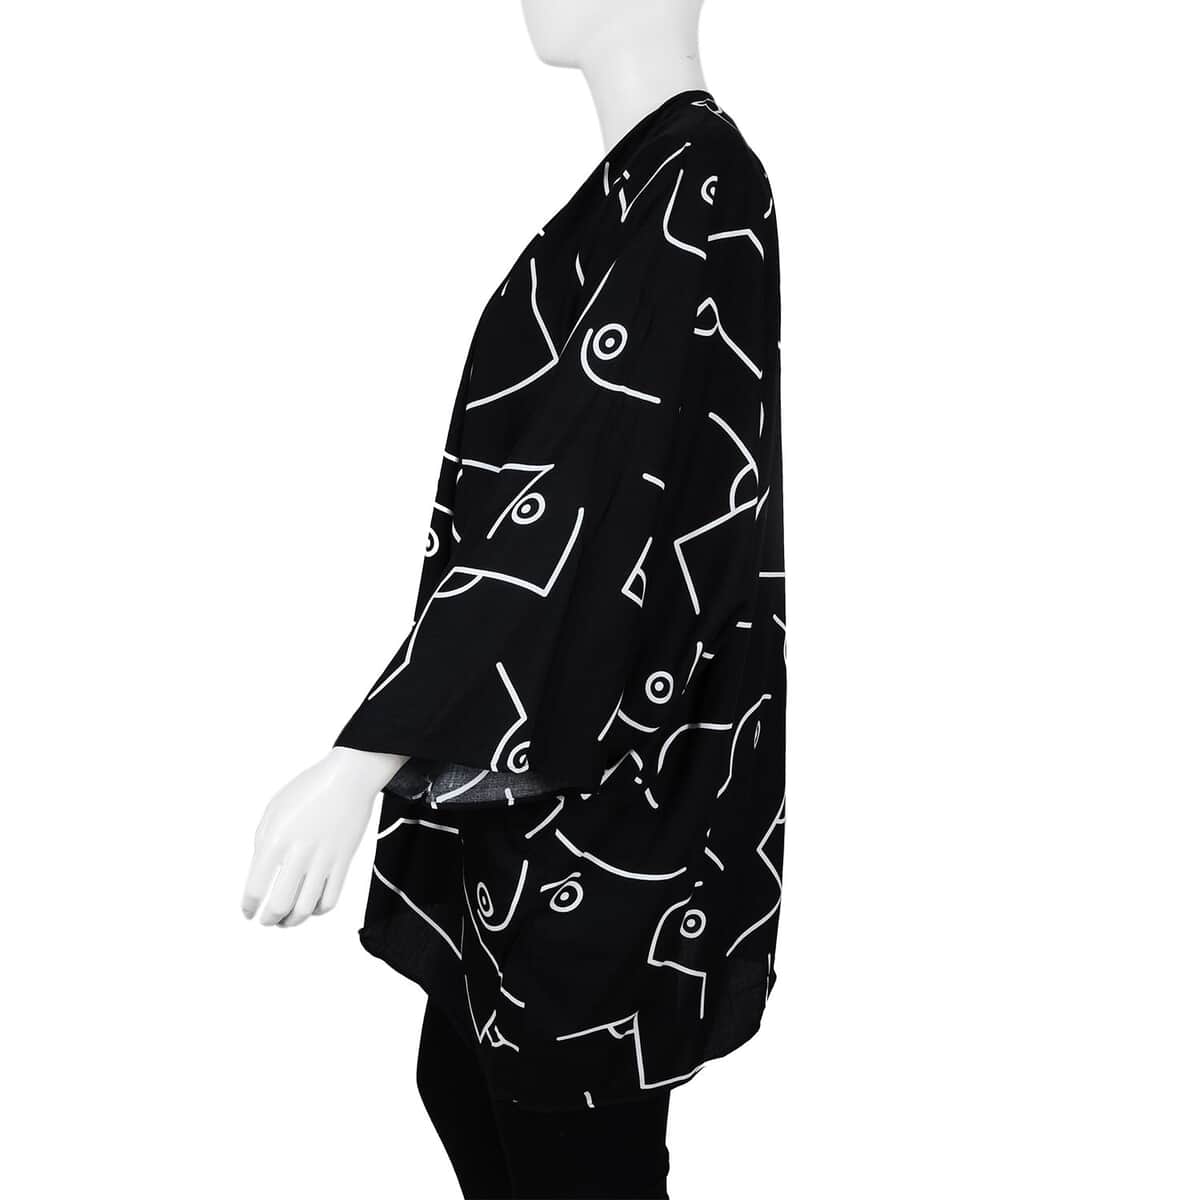 Tamsy Black Abstract Pattern 100% Cotton Kimono - One Size Fits Most image number 2